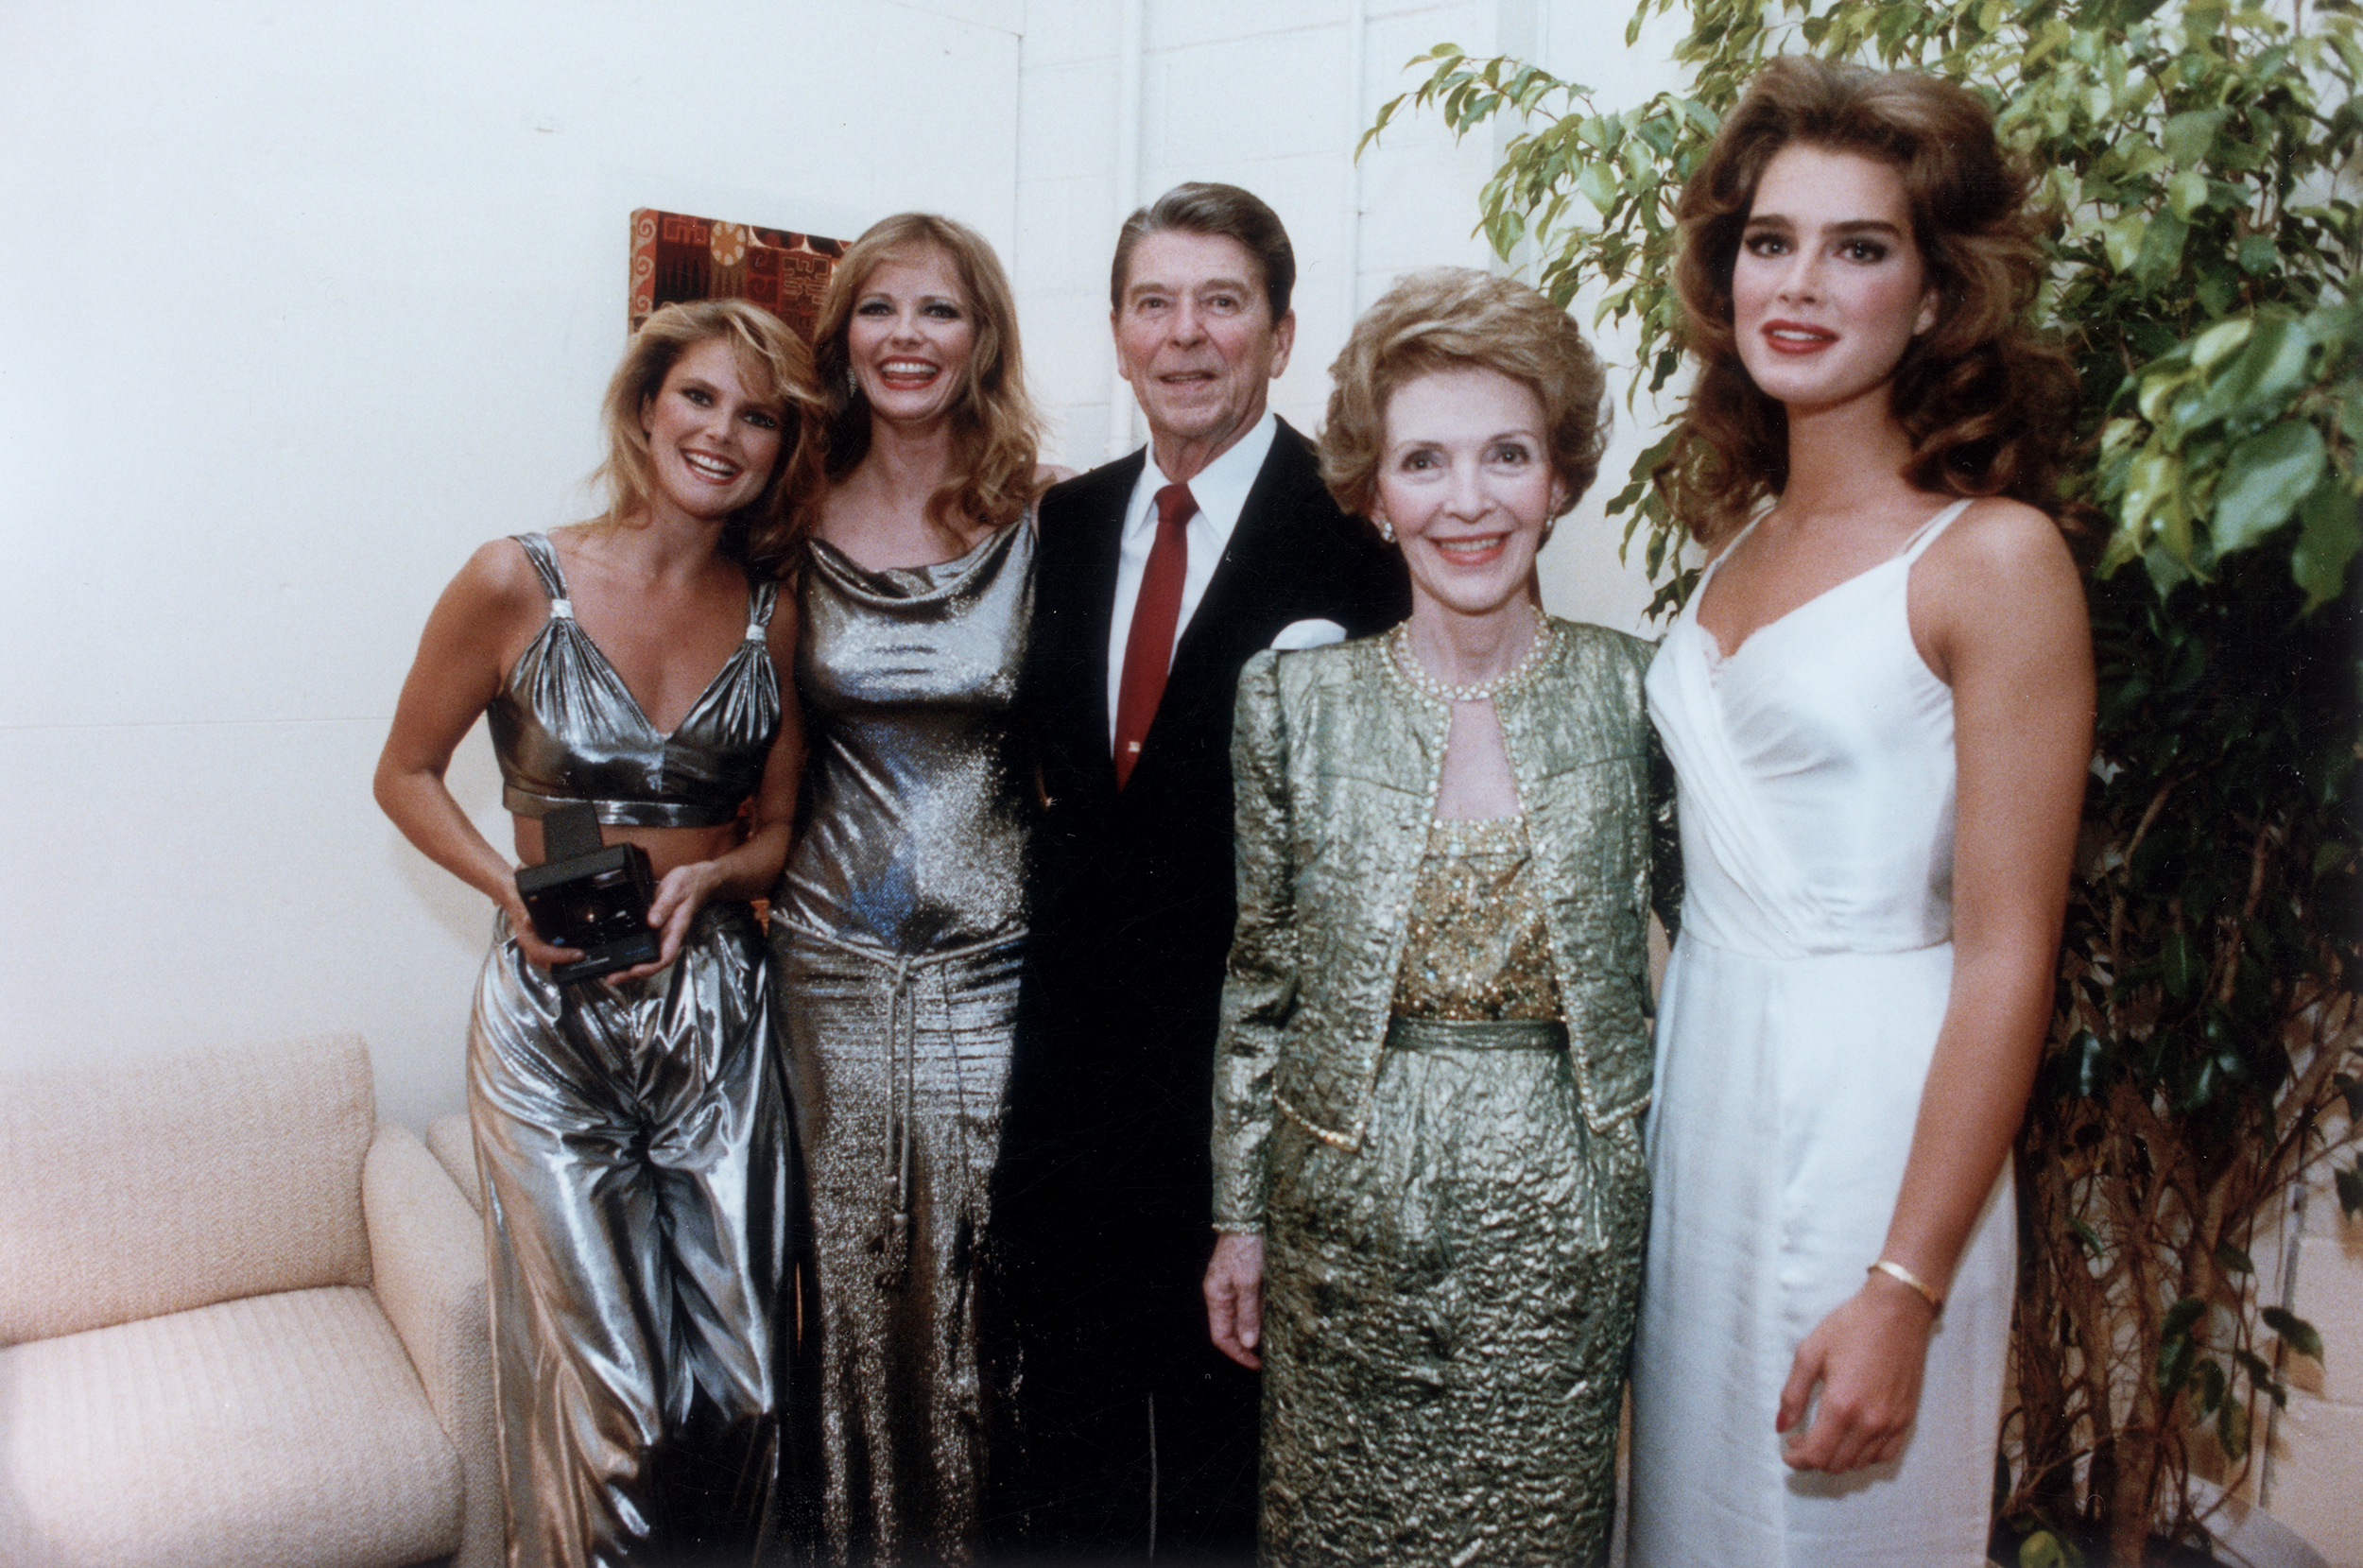 Ronald Reagan and Nancy Reagan pose with American models Christie Brinkley, Cheryl Tiegs and Brooke Shields backstage at the Bob Hope USO show on May 20, 1983.